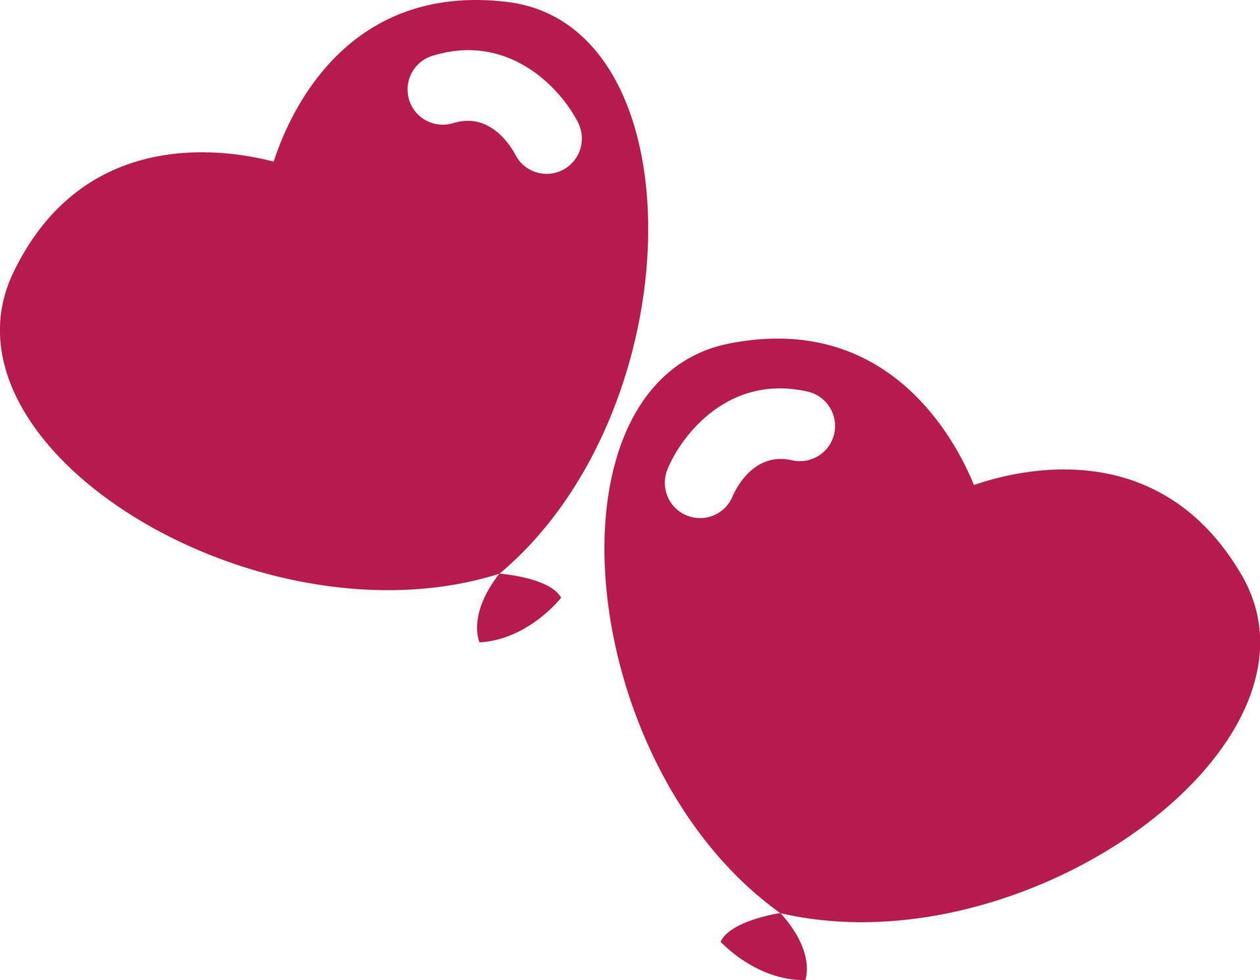 Two floating heart balloons, illustration, vector on a white background.